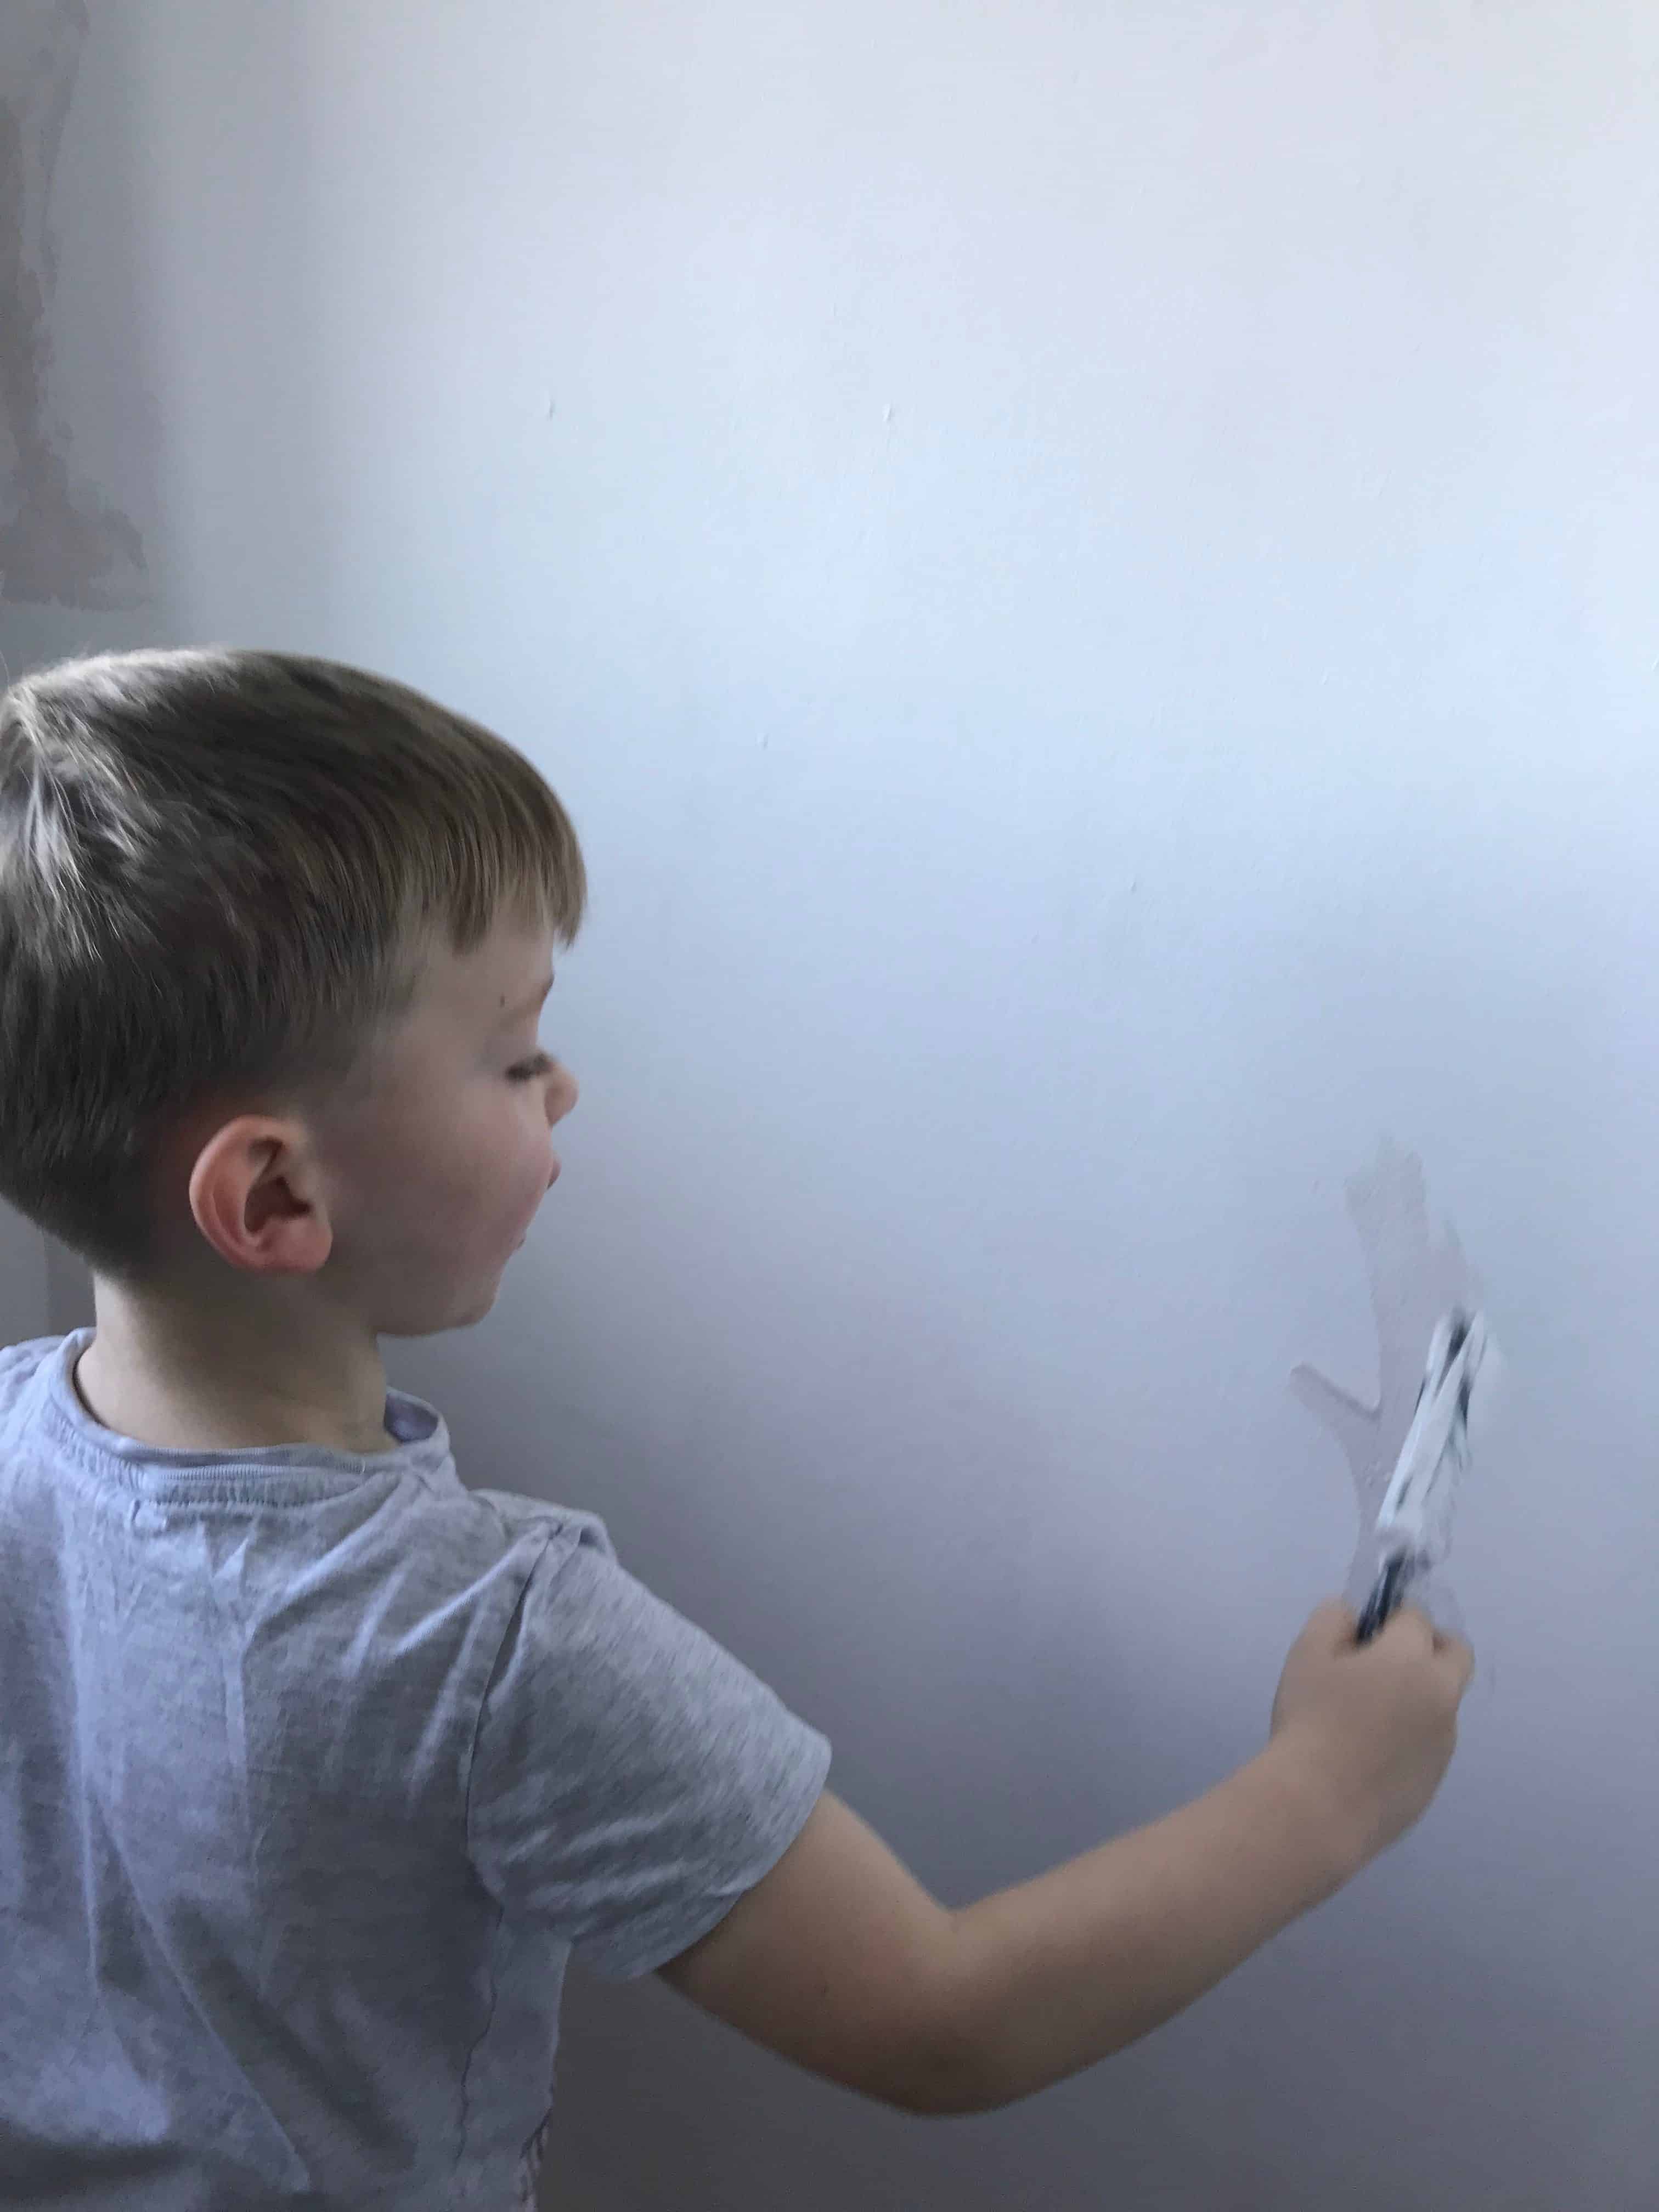 painting the walls